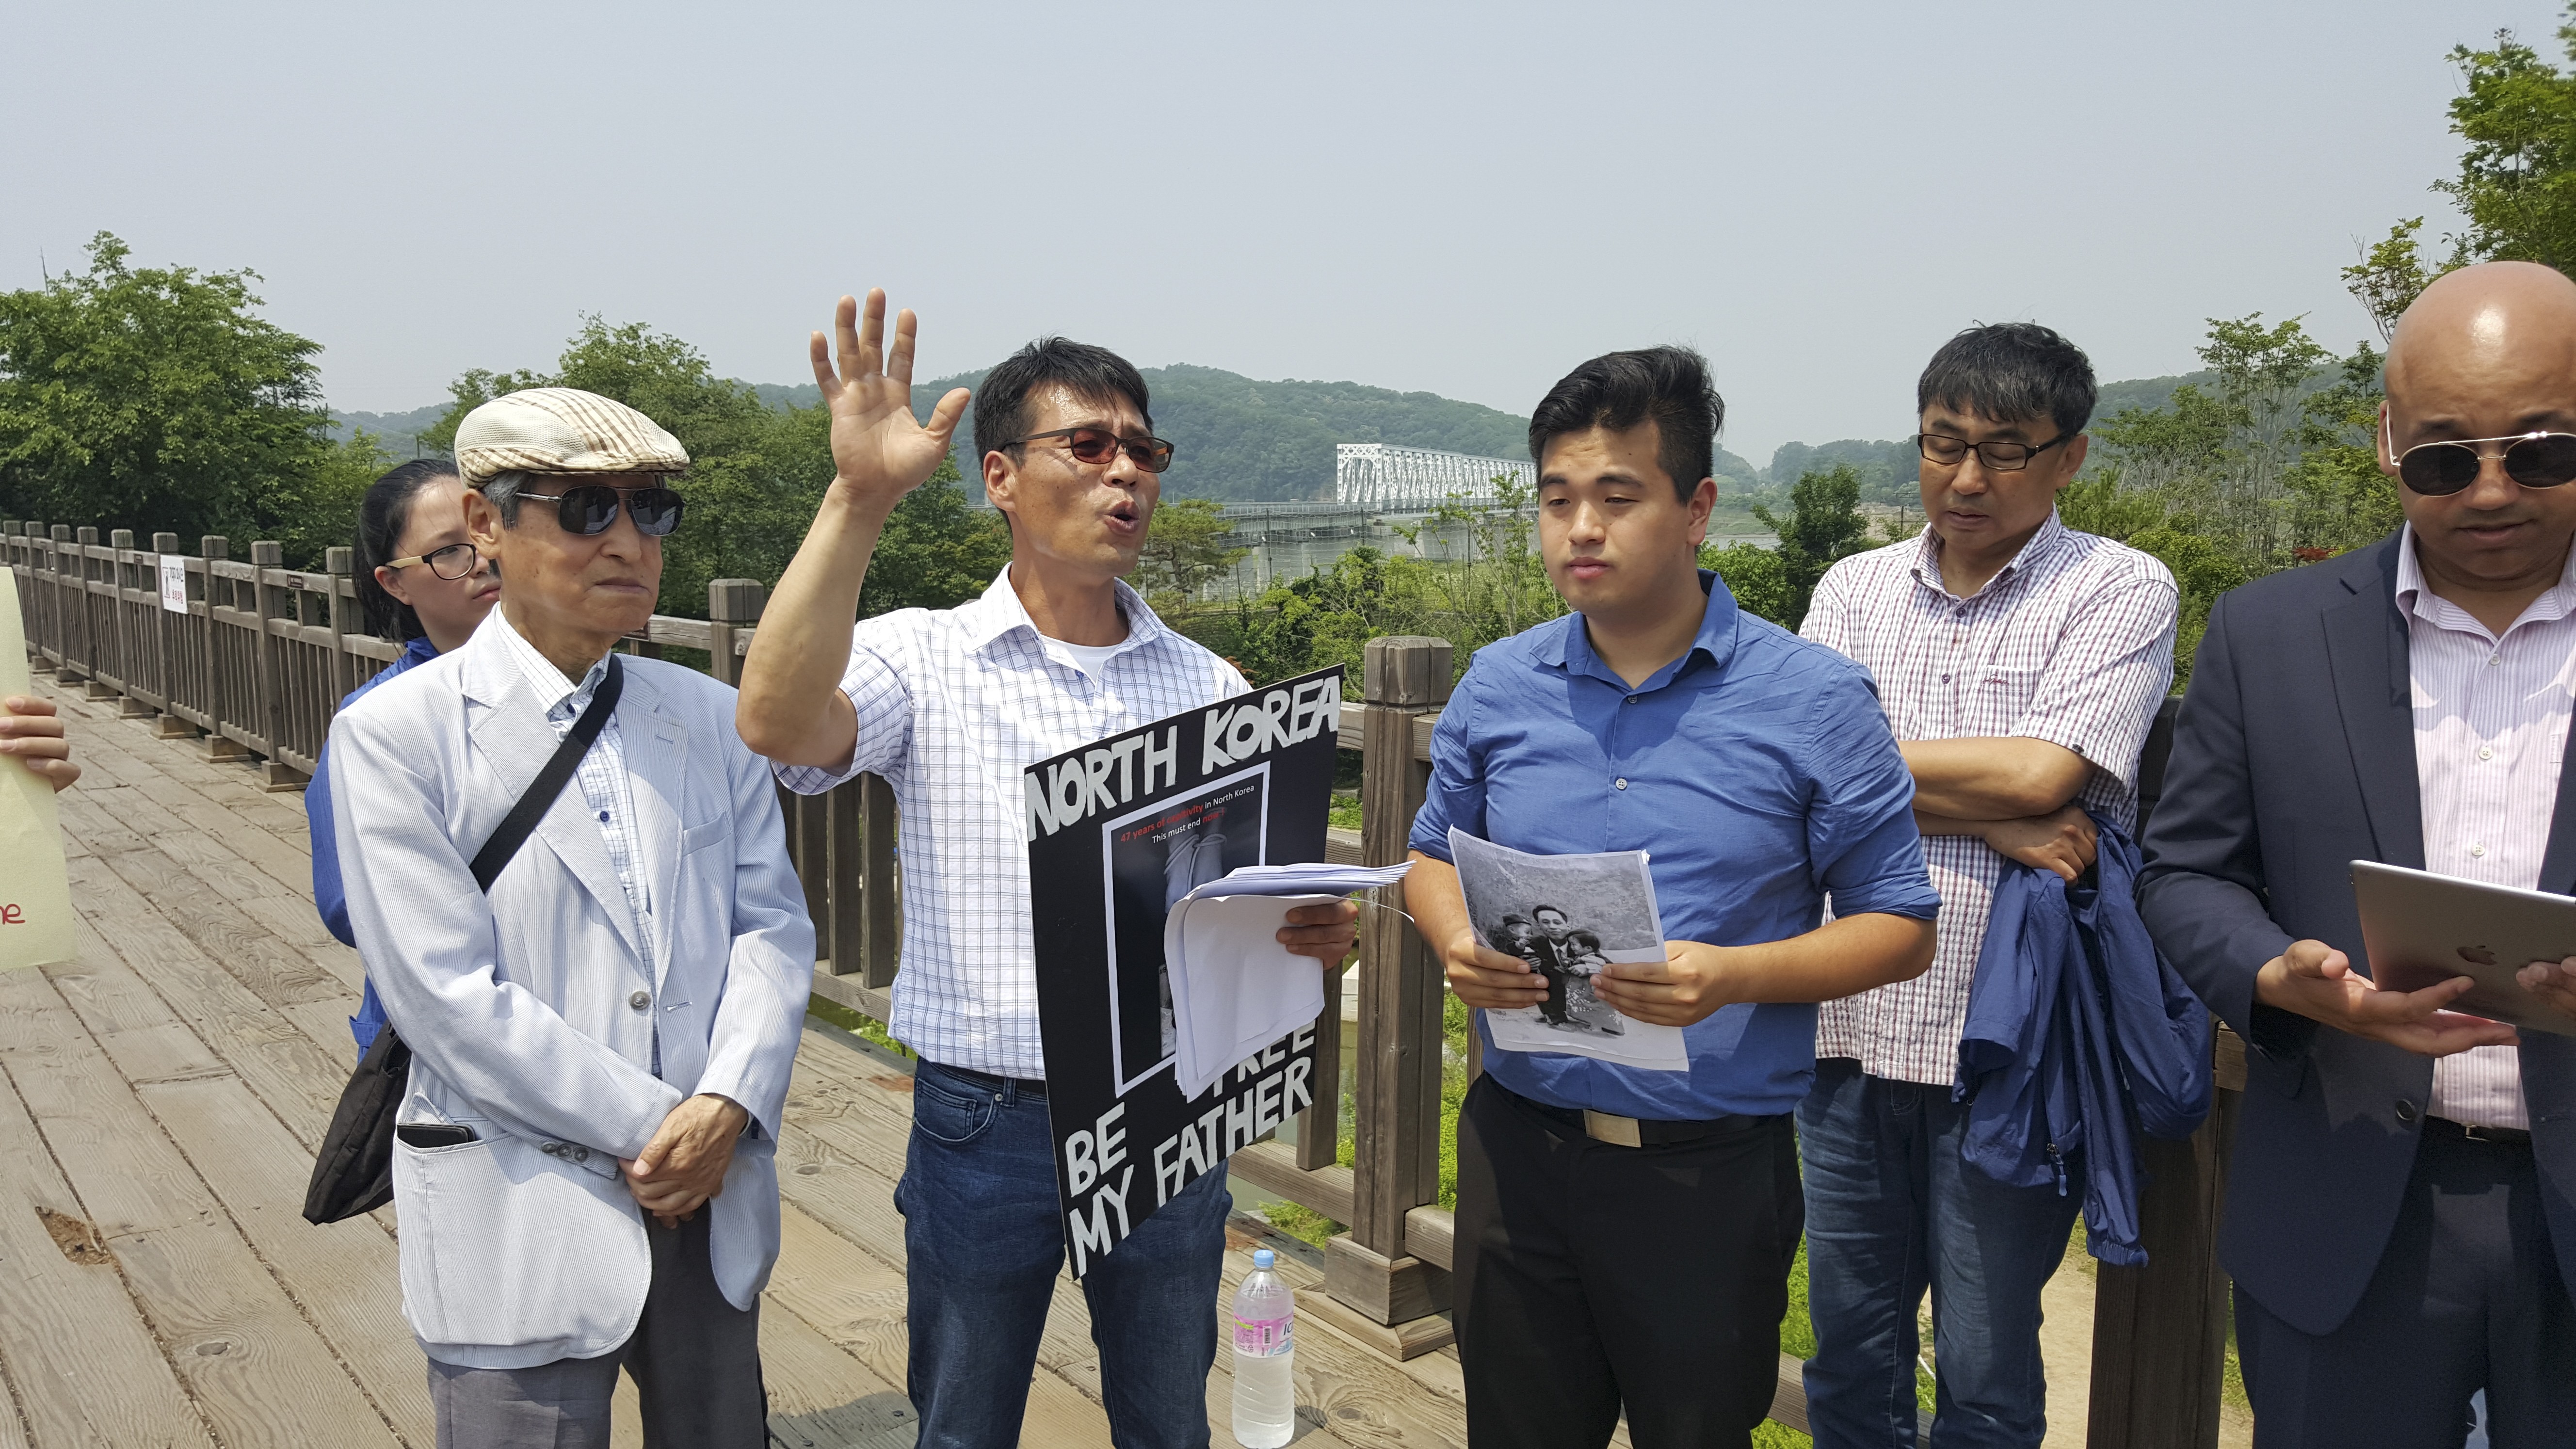 Hwang In-cheol (third left) on the Friendship Bridge in Panmunjeon with members of Seoul-based charity Teach North Korean Refugees and supporters in 2016 as he campaigns for his father’s return. Photo: Hwang In-cheol